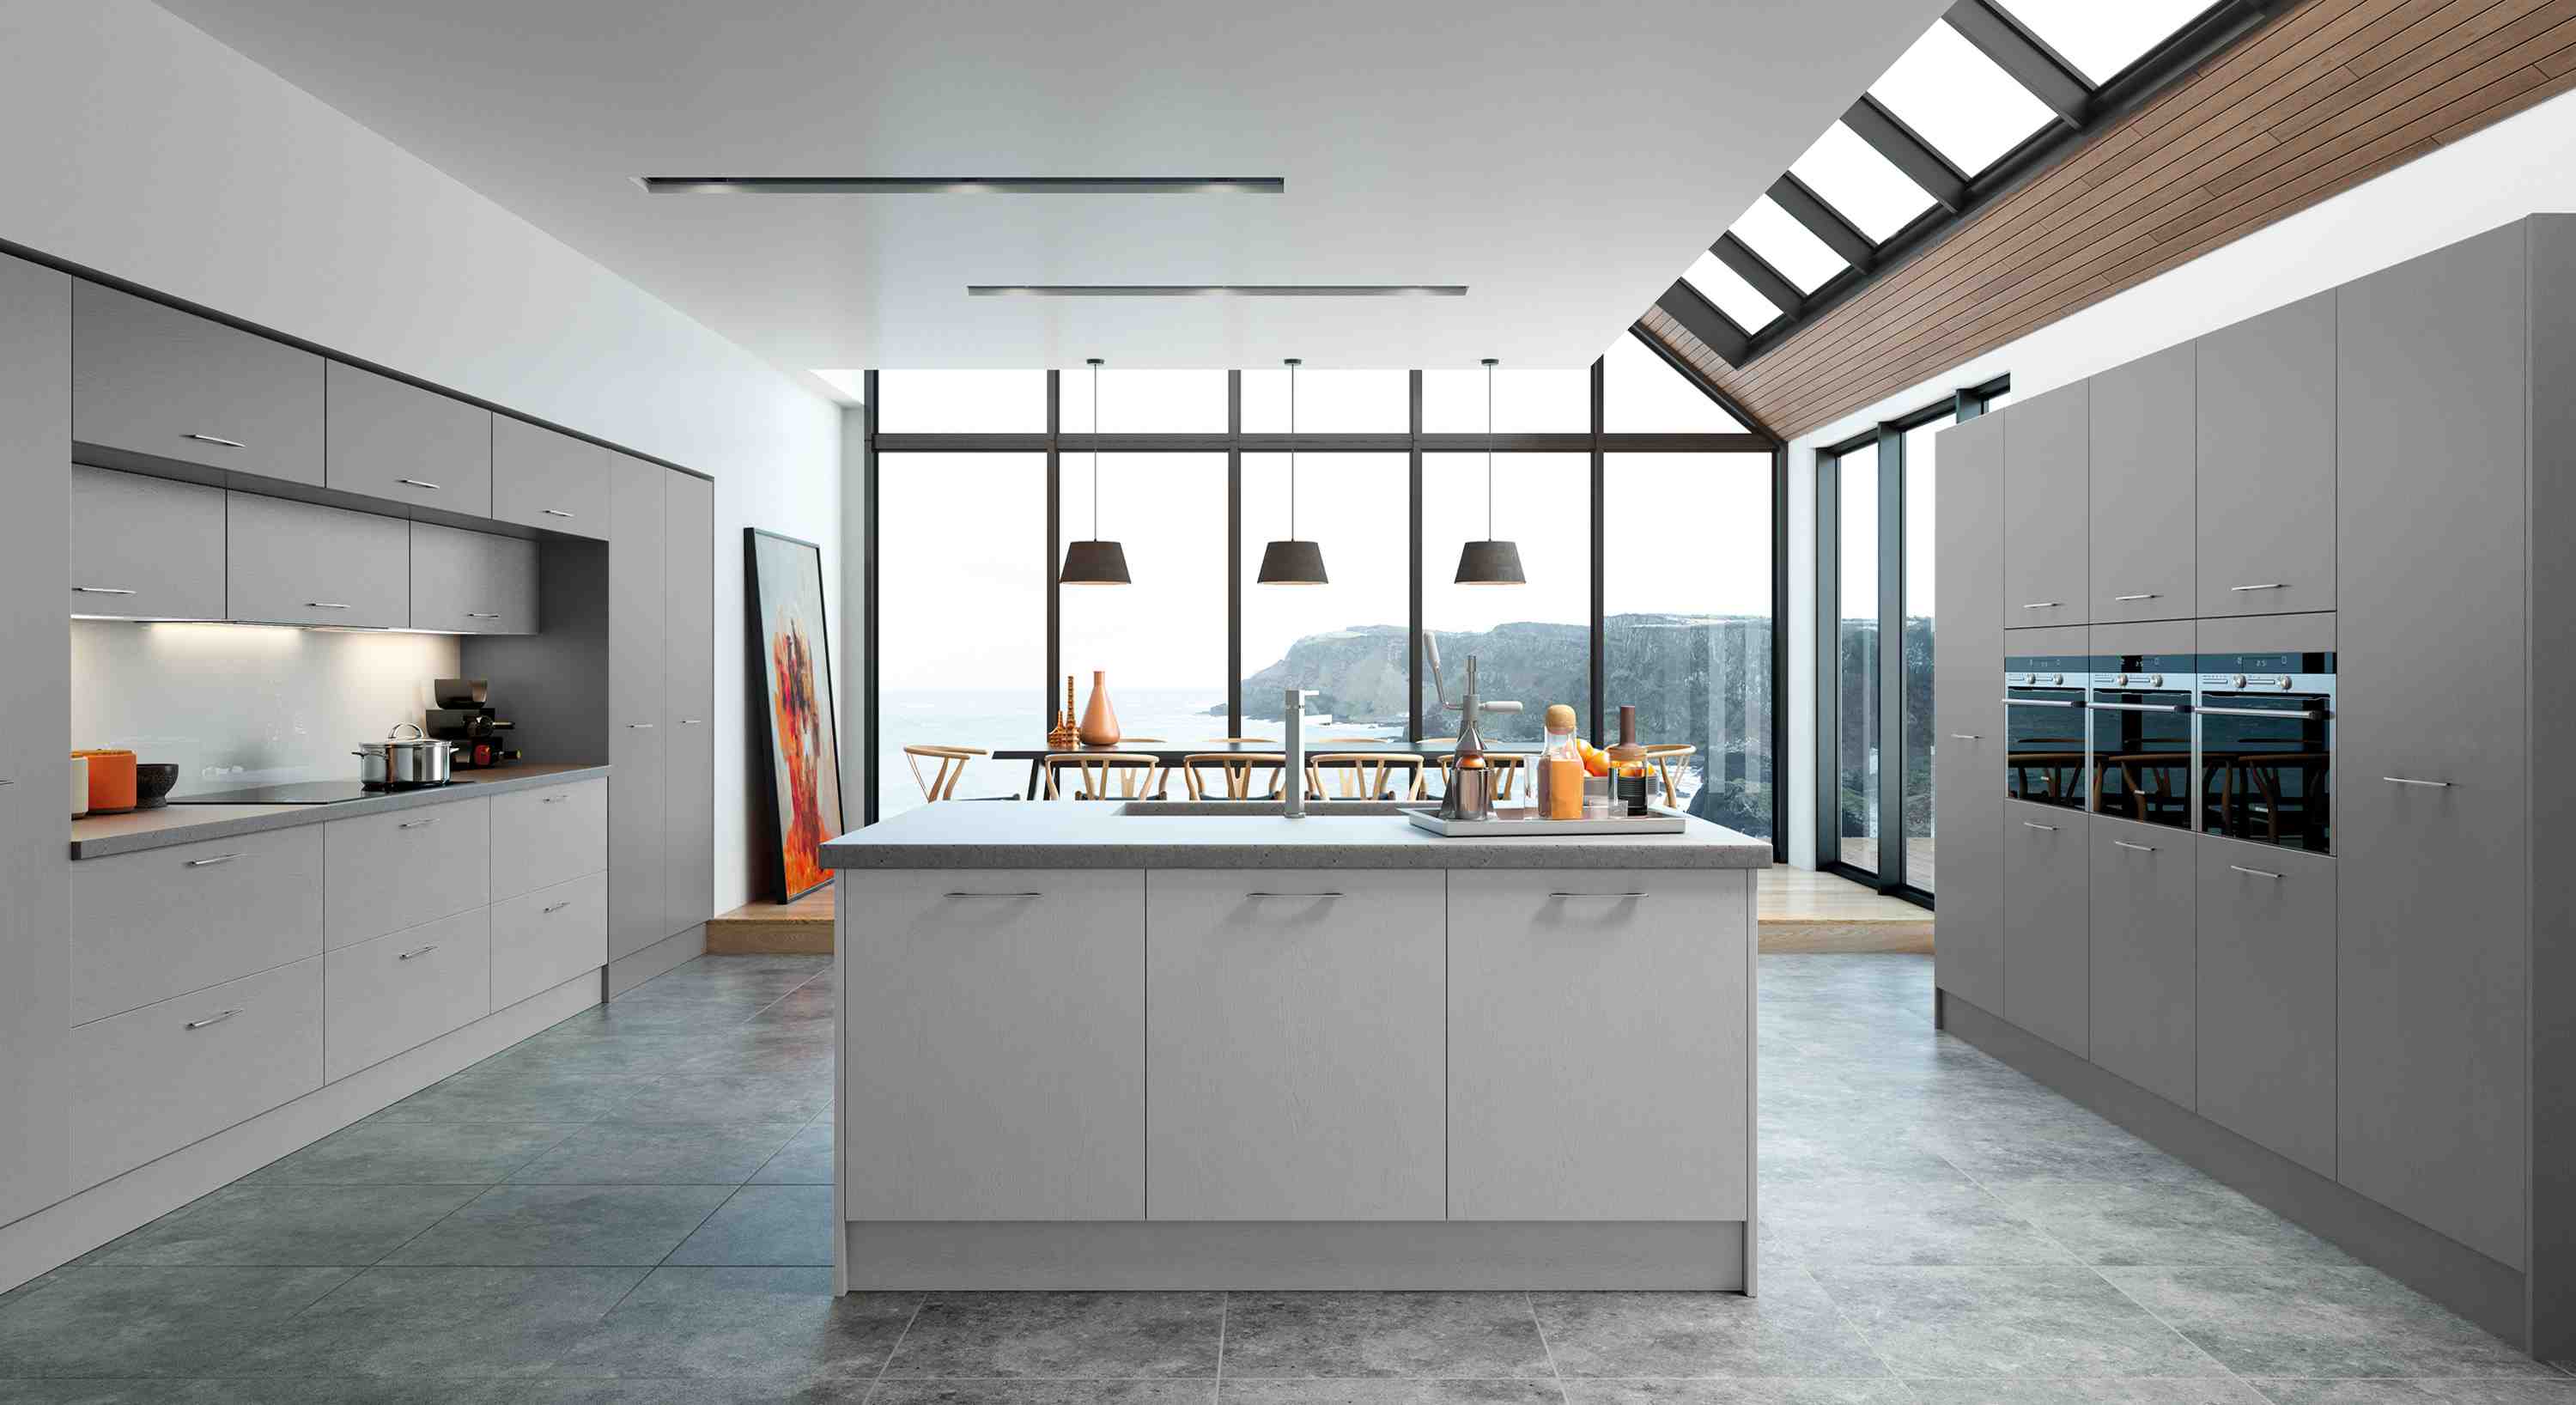 mather is a vinyl cut and edged door that offers something different from standard slab kitchens, with it's real wood effect grained legno vinyl, creating a natural warmth.